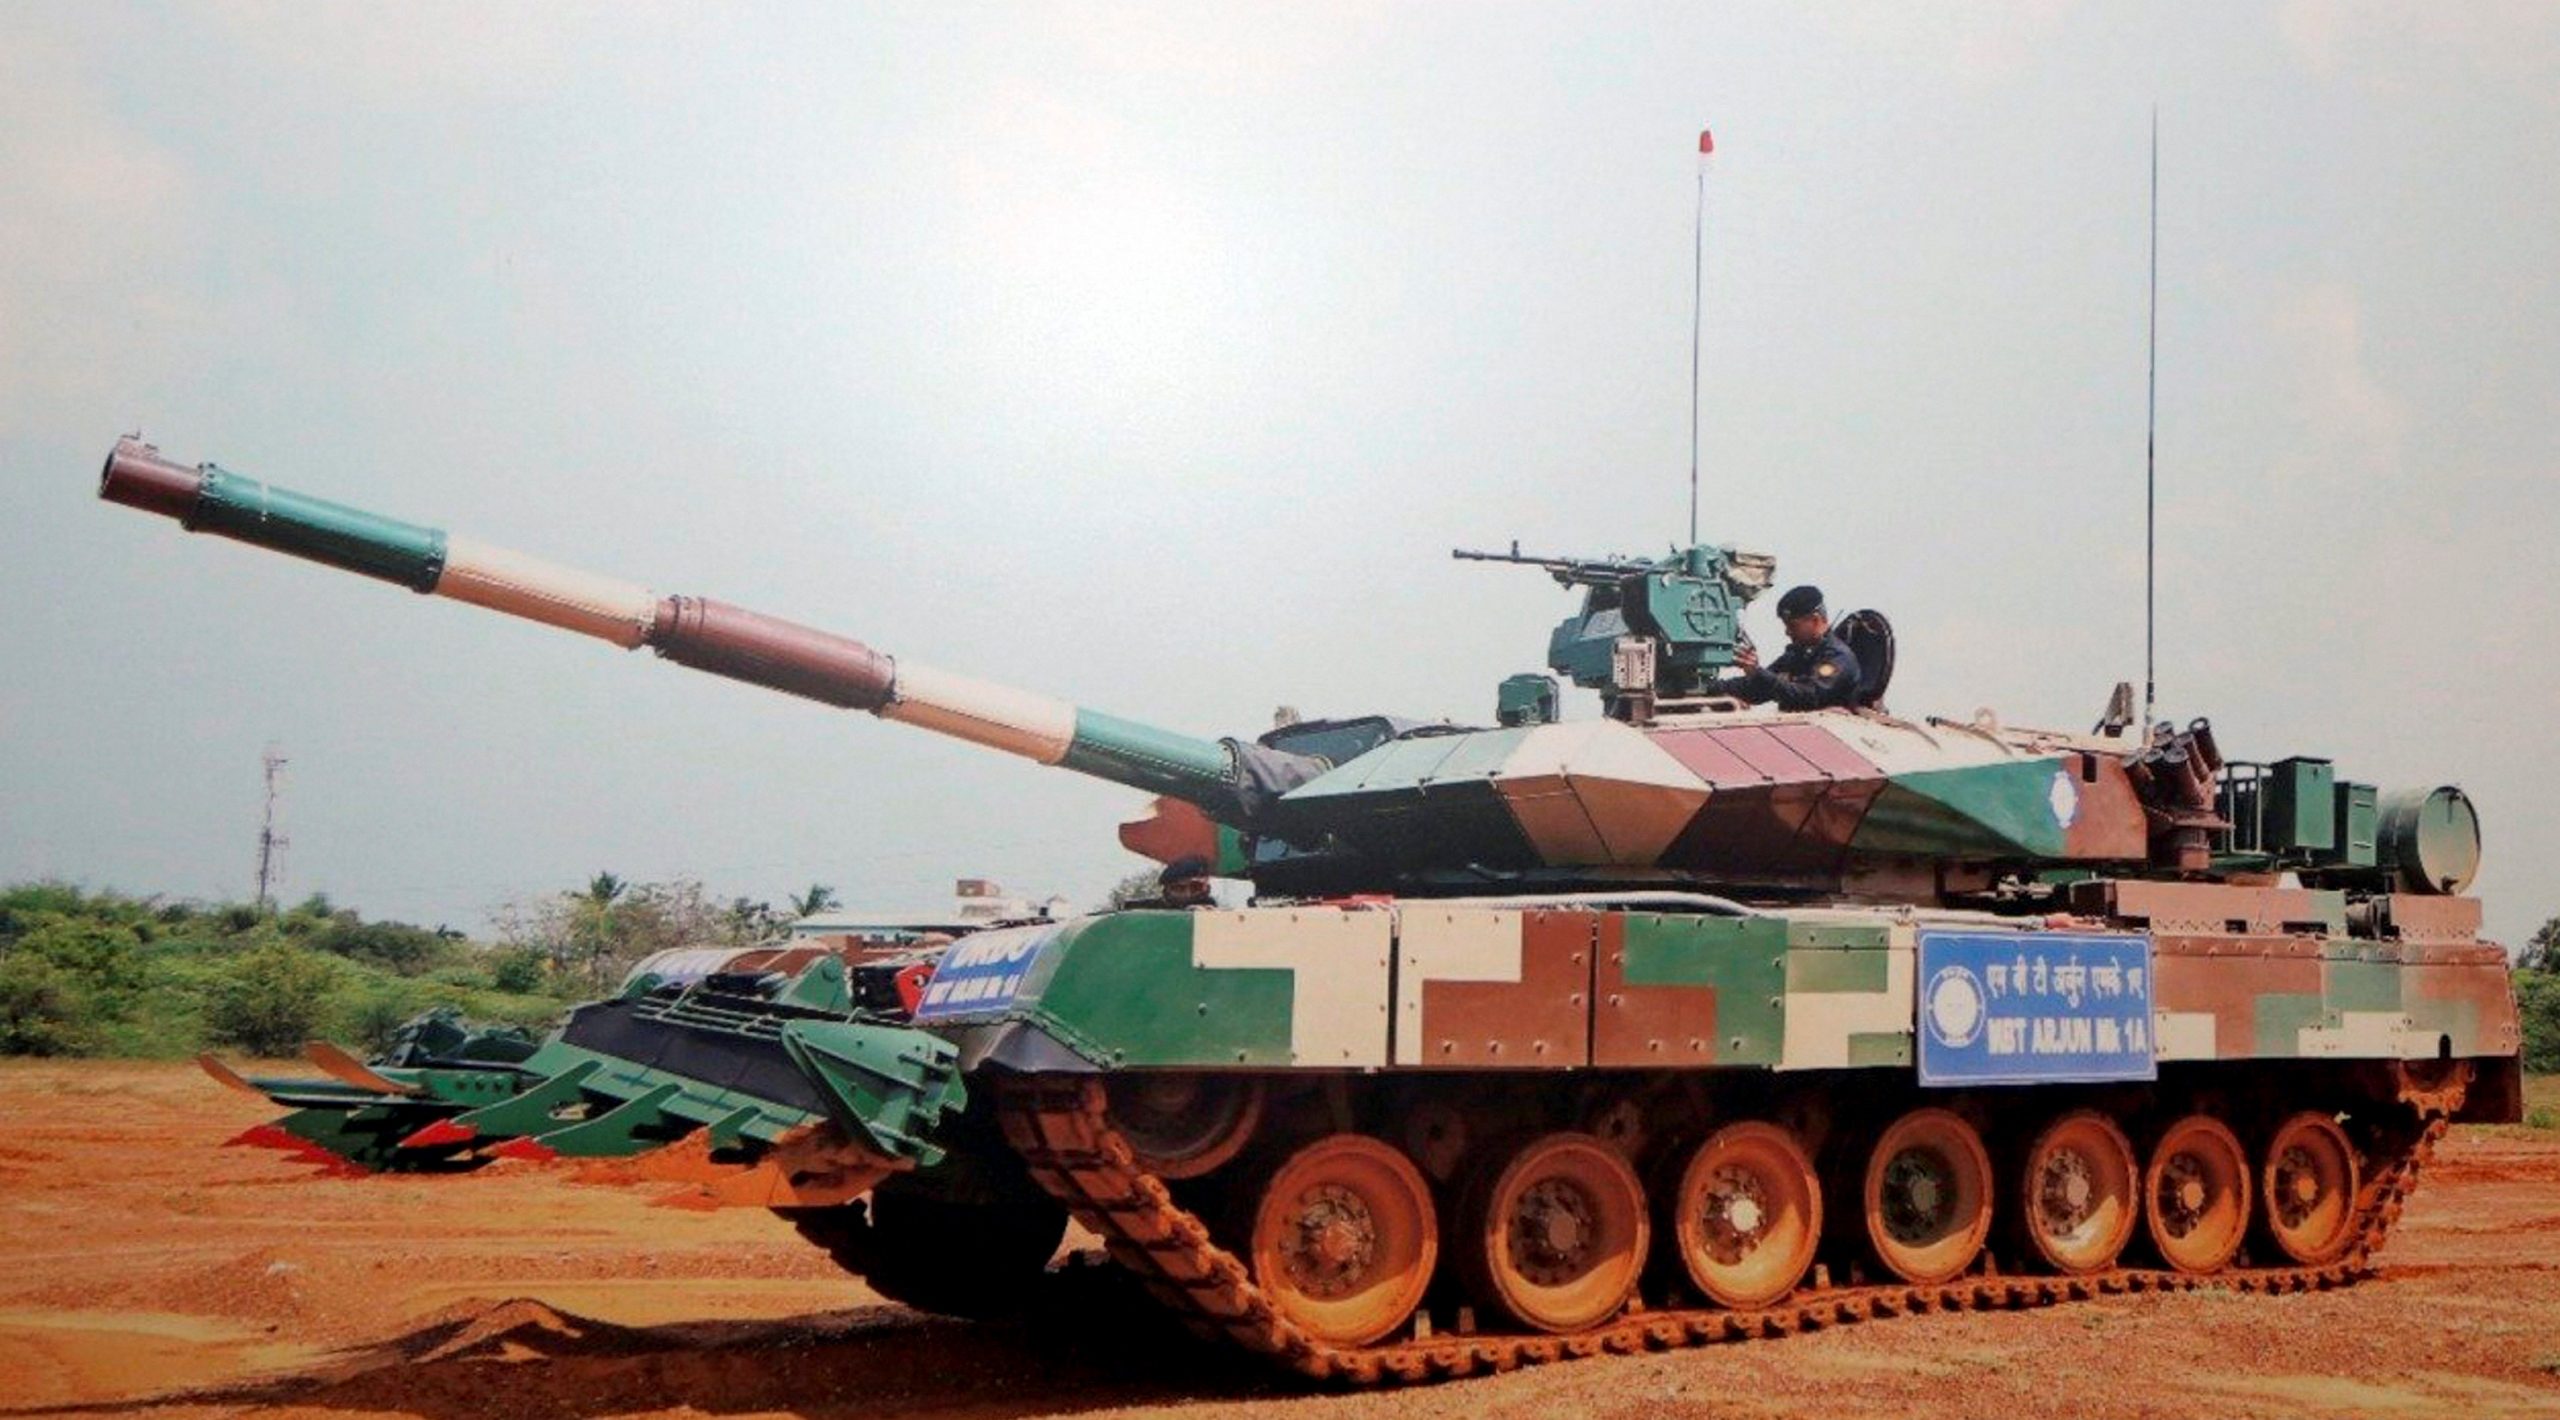 All about Arjun Mark 1-A tank, its all-terrain mobility and importance